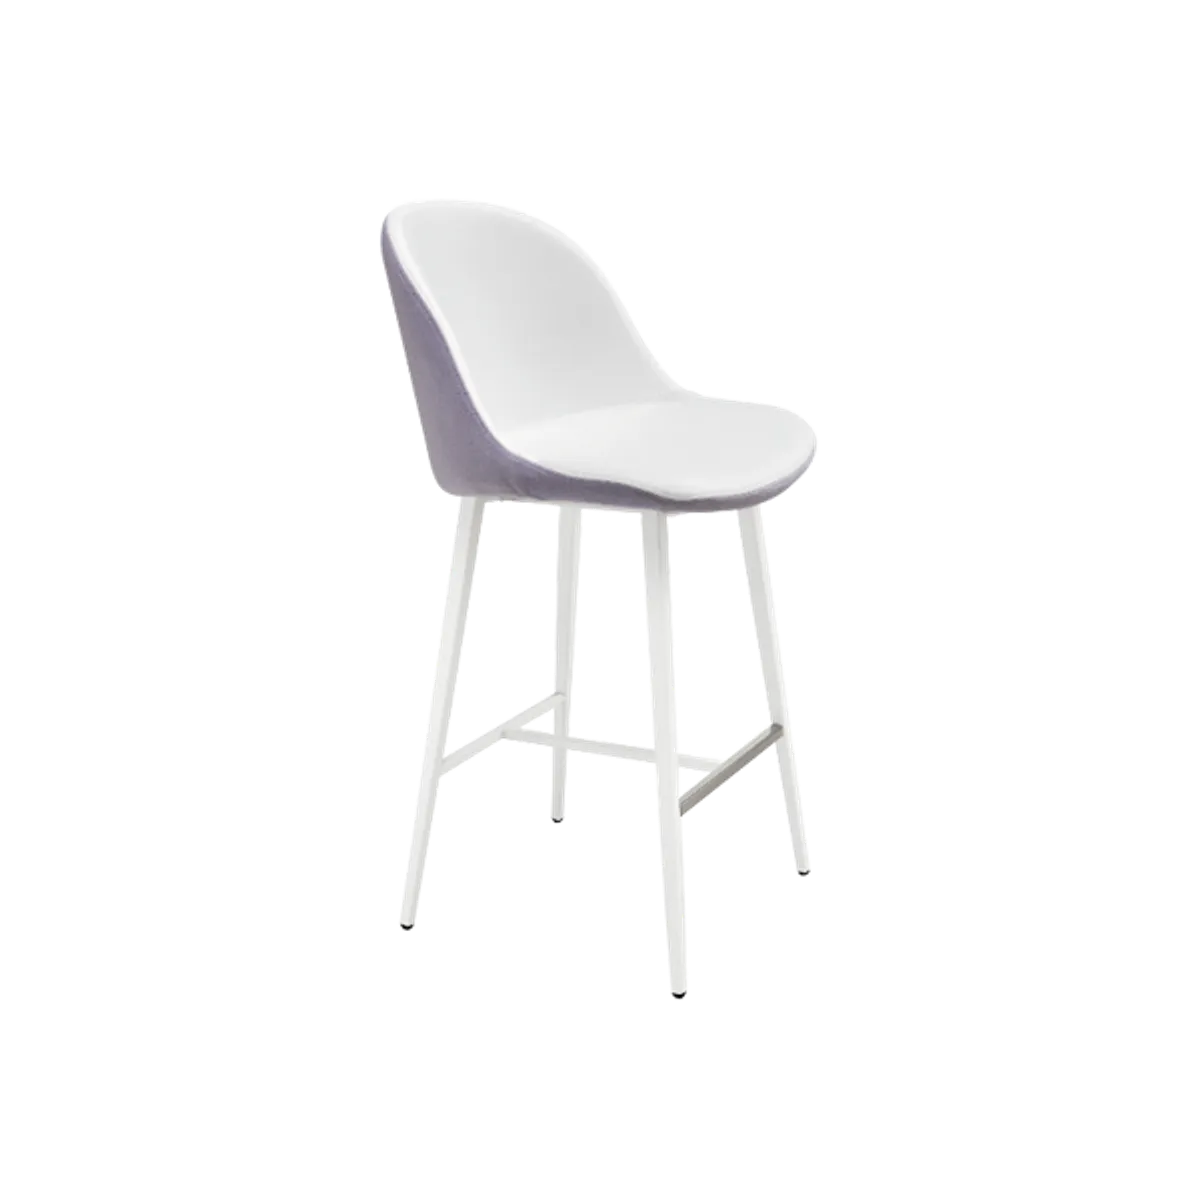 Web Sonny Bar Stool Hotel Lounge Furniture Inside Out Contracts